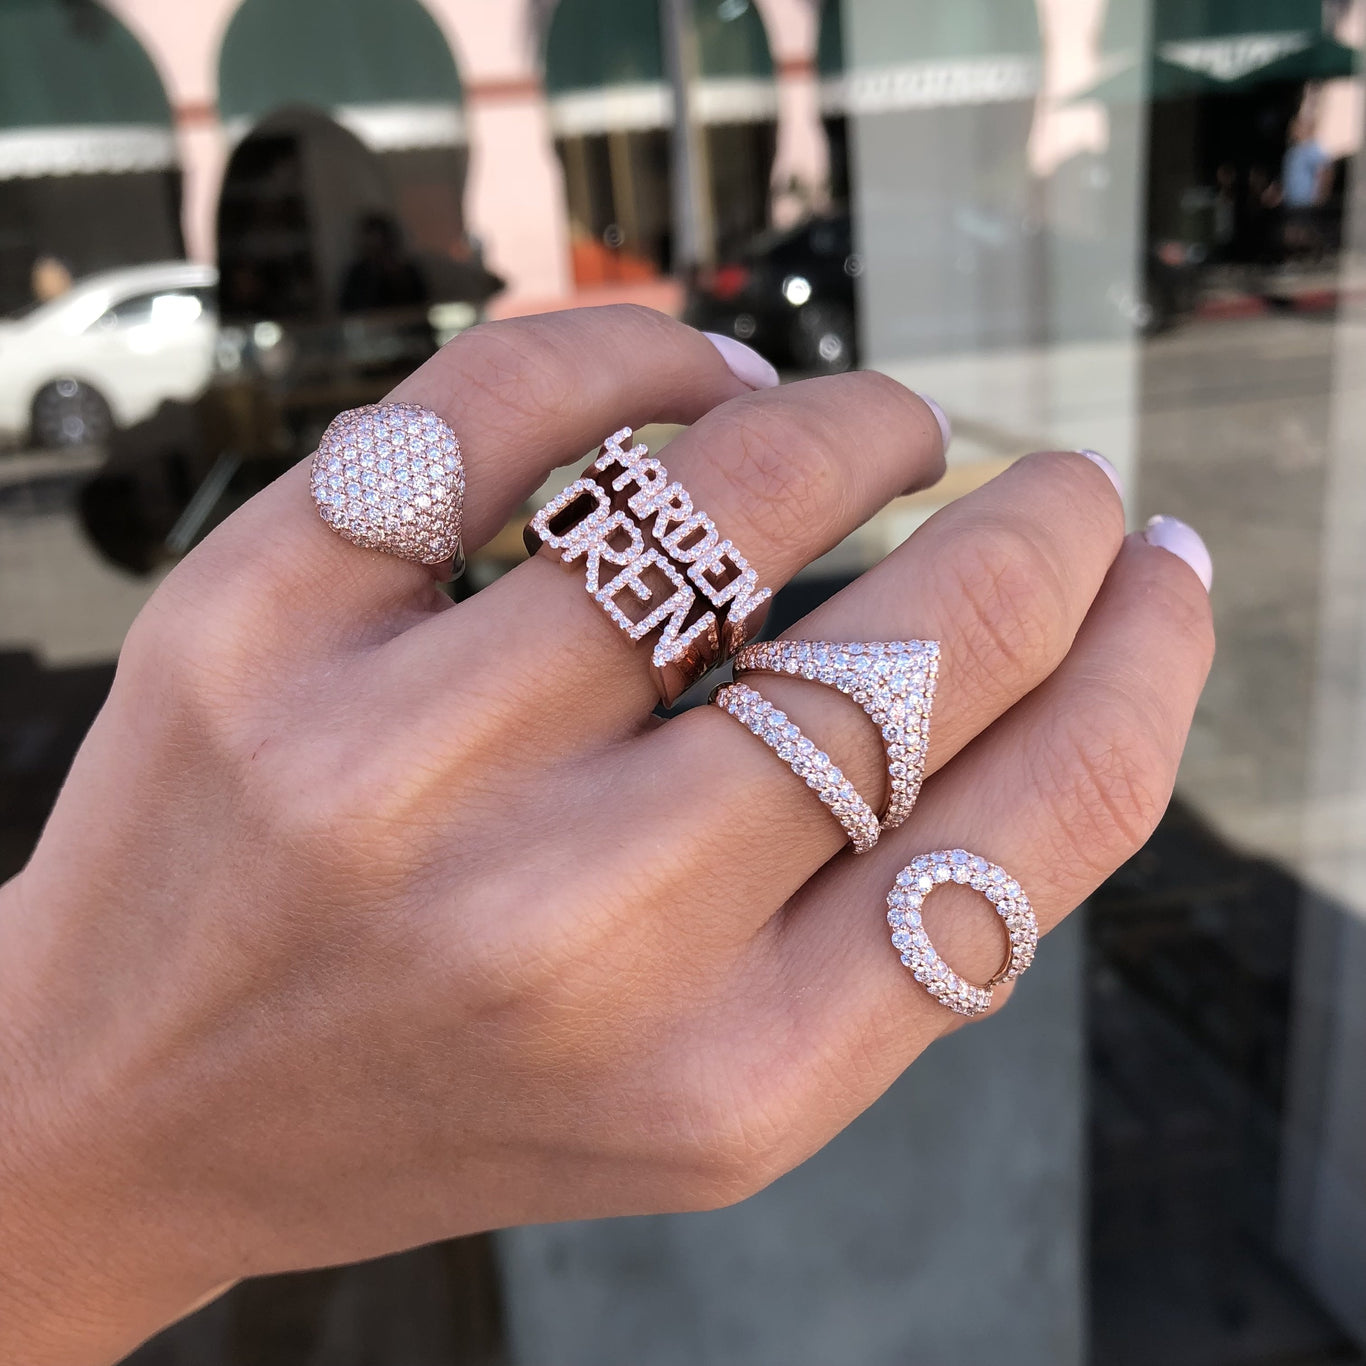 Purchase the High-Quality Initial & Name Rings | GLAMIRA.com